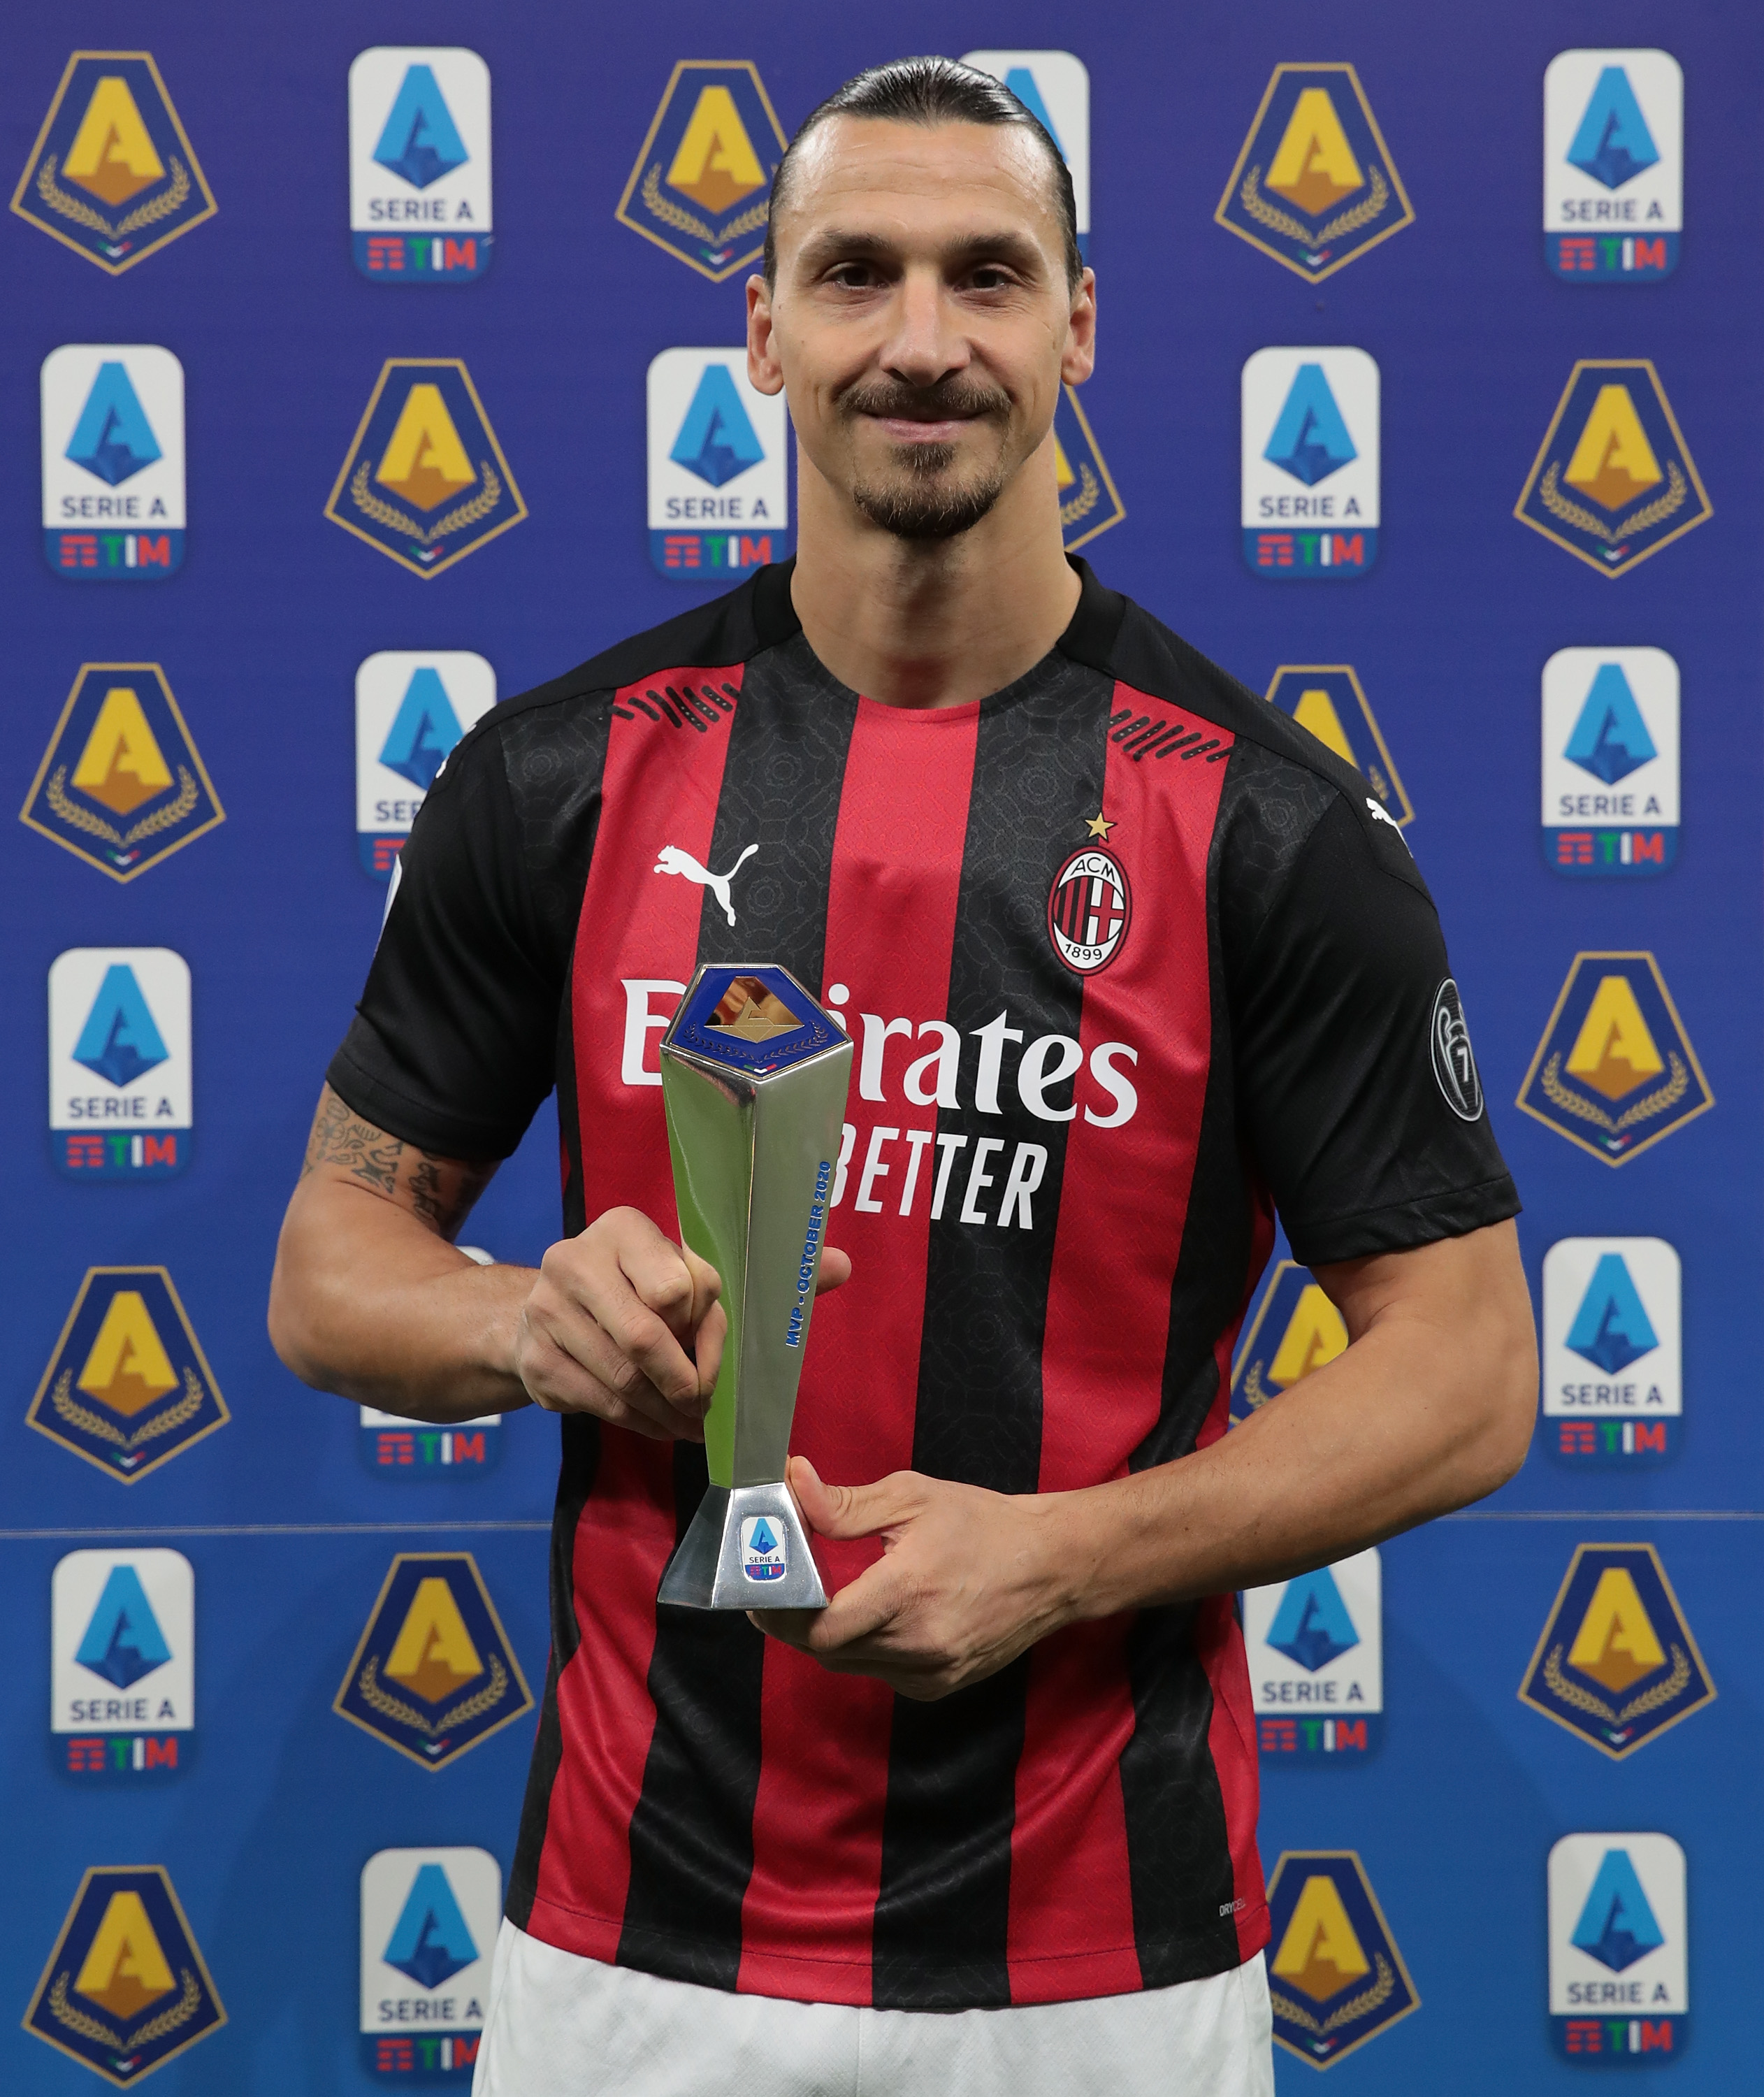 At sige sandheden gyldige molekyle SPORF on Twitter: "🇮🇹 @Ibra_Official wins the Series A Player of the  Month award. 📈 Top scorer in the league. 👴 39 years old, and playing some  of the best football of